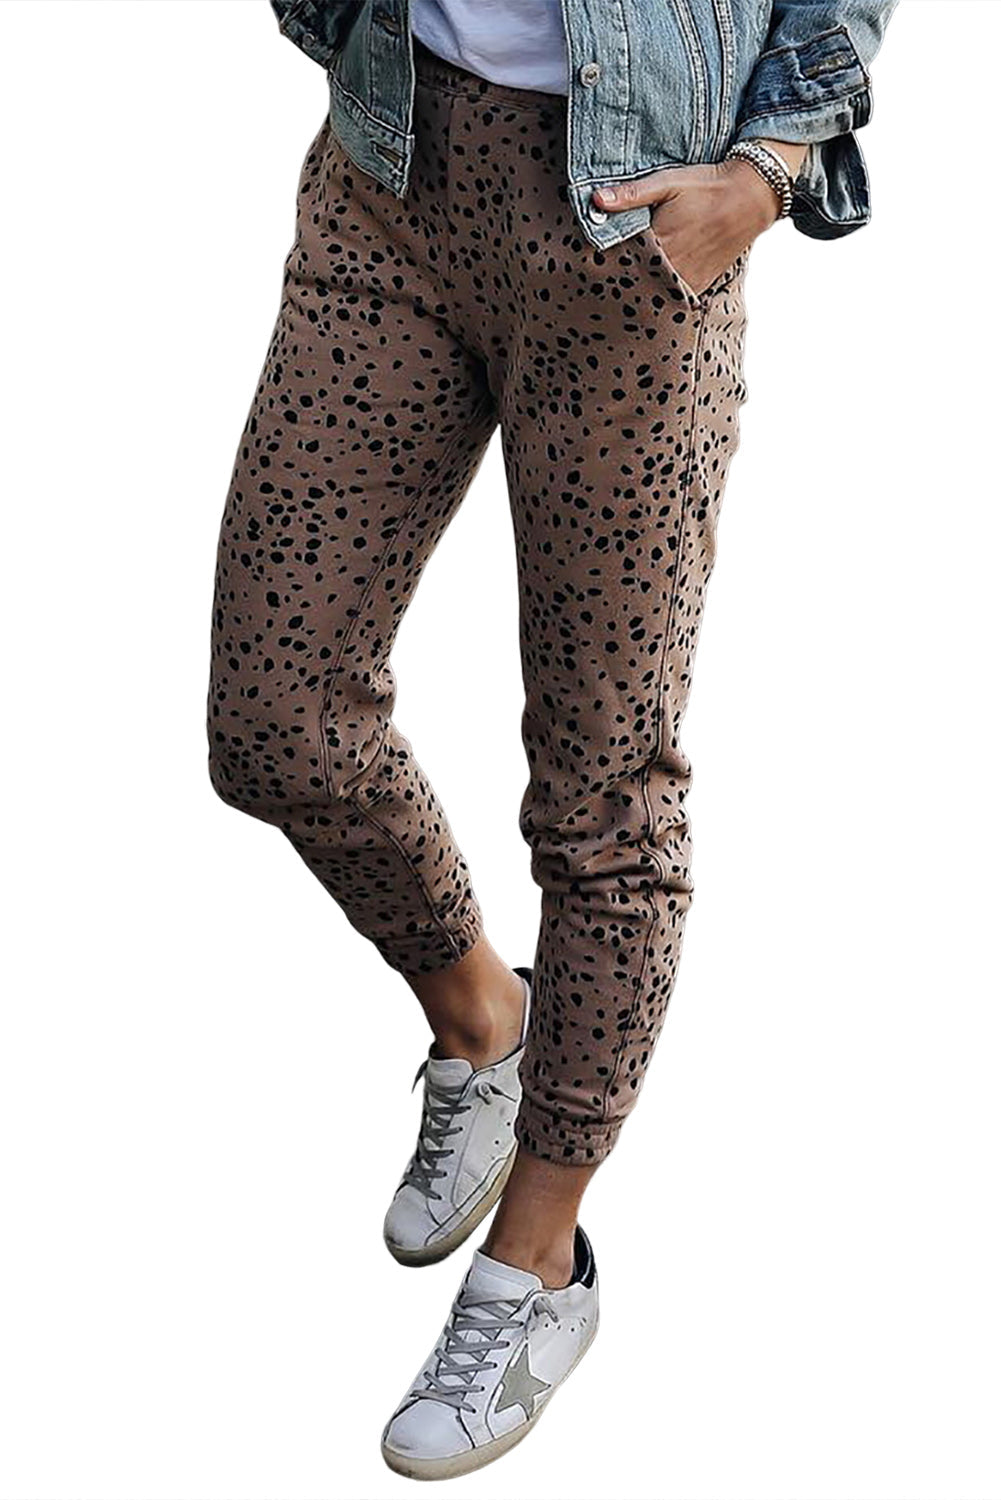 Leopard Animal Spots Pocketed Casual Skinny Pants-2